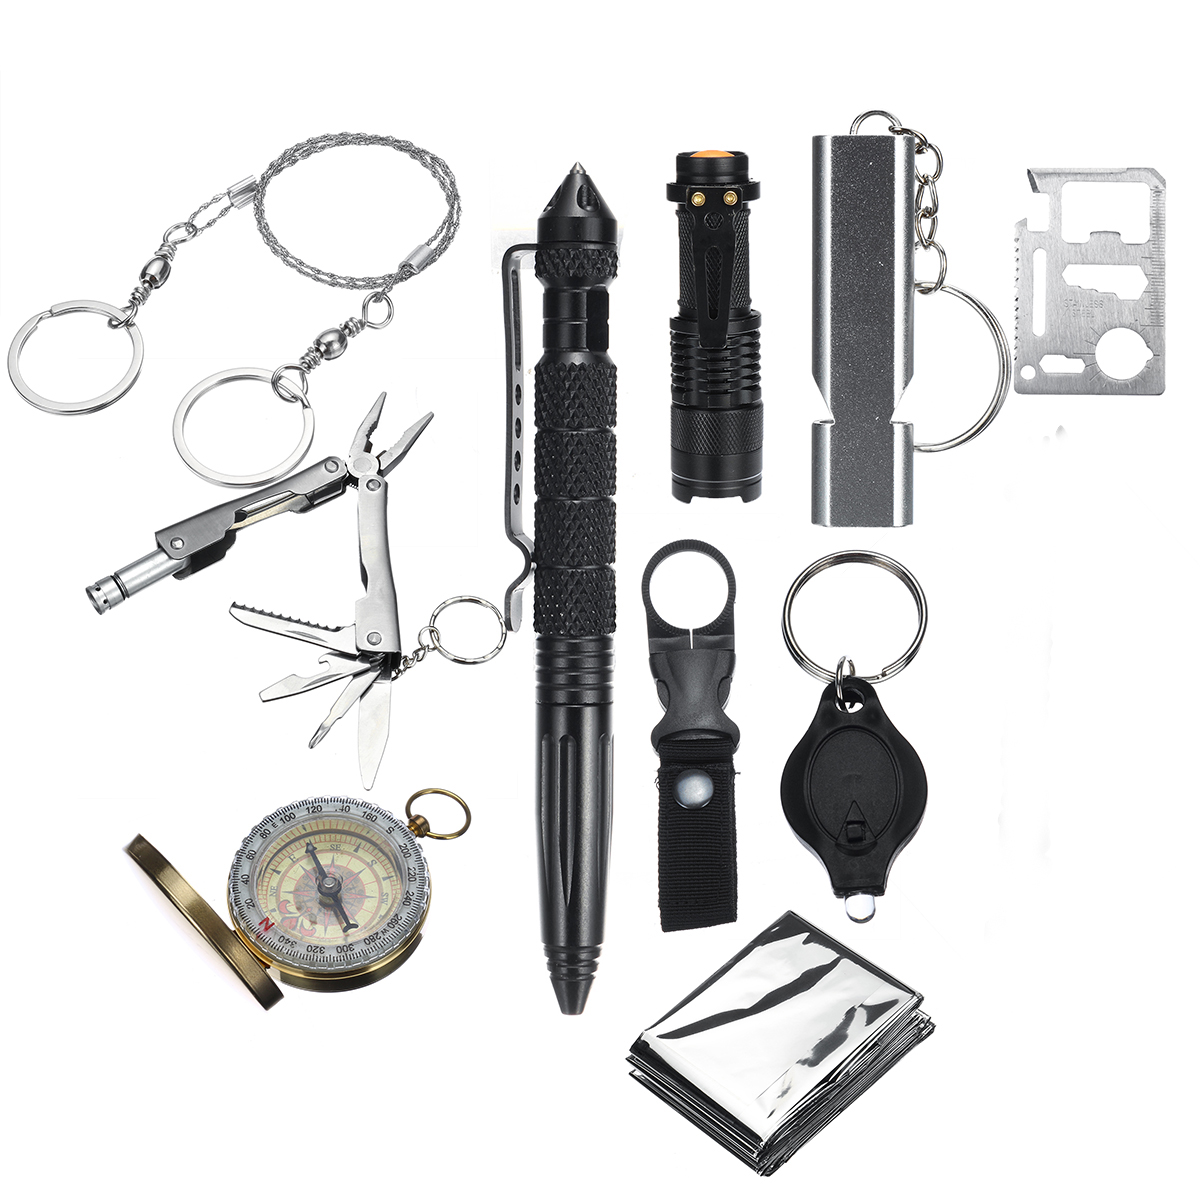 

11 In 1 SOS Emergency Survival Kit EDC Tools Compass Fret Saw Flashlight Tactical Camping Hiking